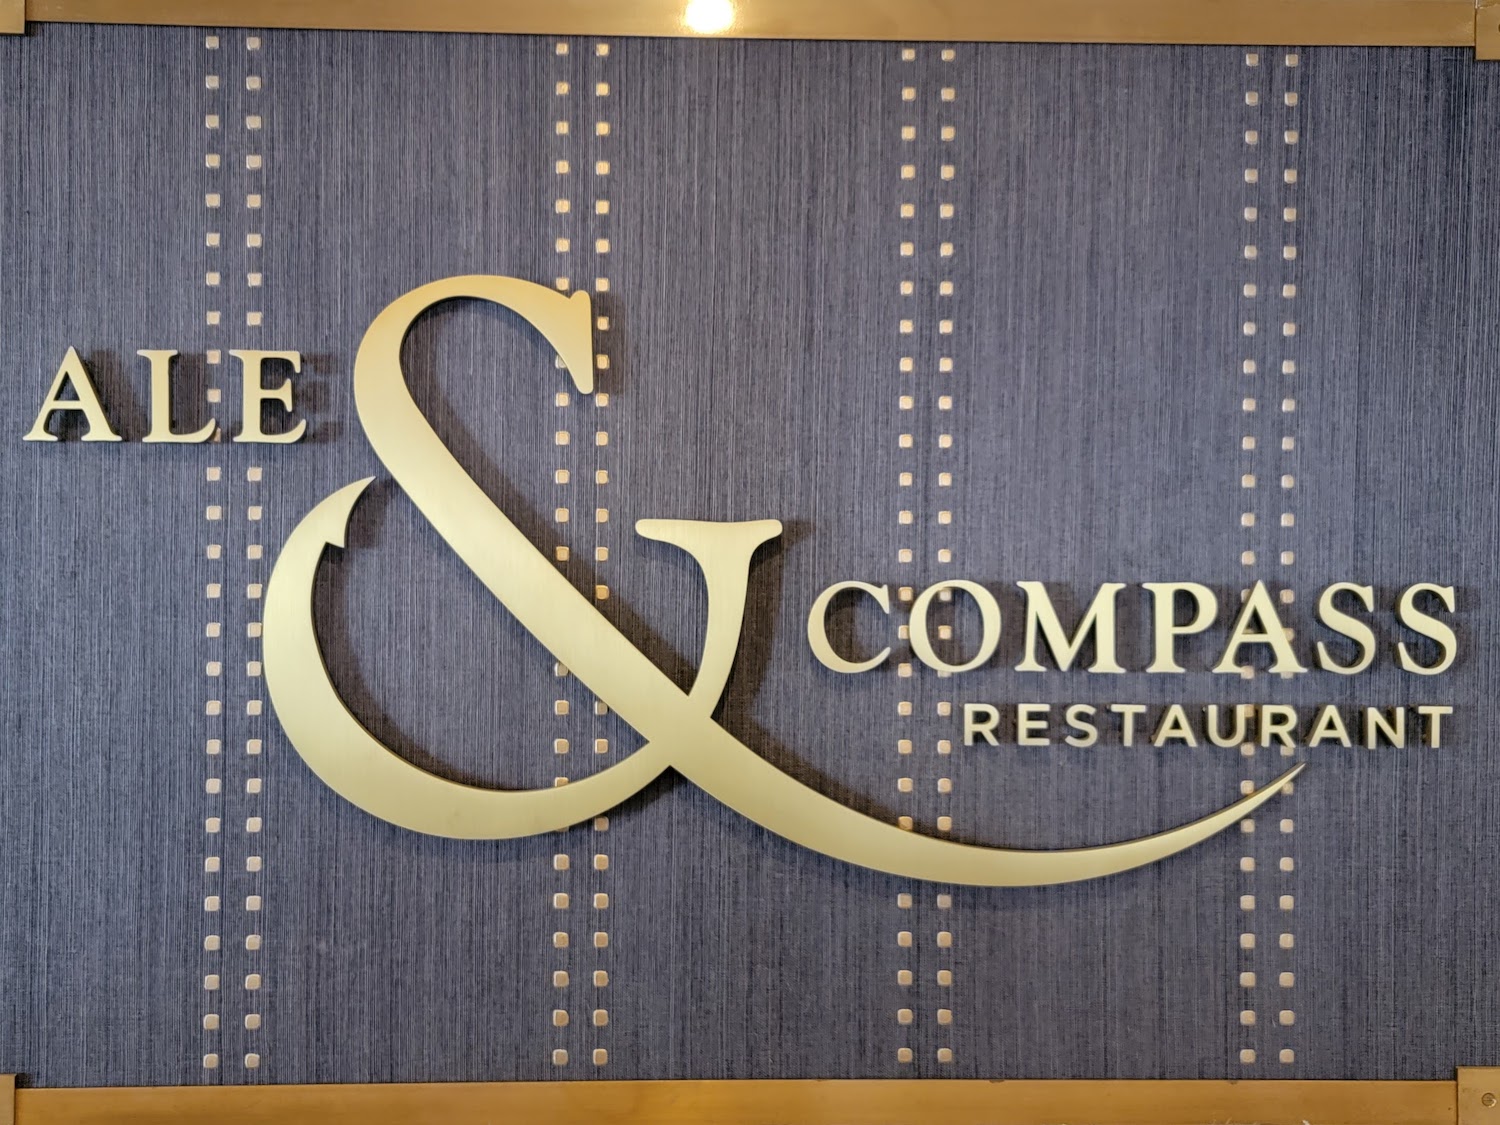 Ale & Compass Sign at Disney’s Yacht Club Resort